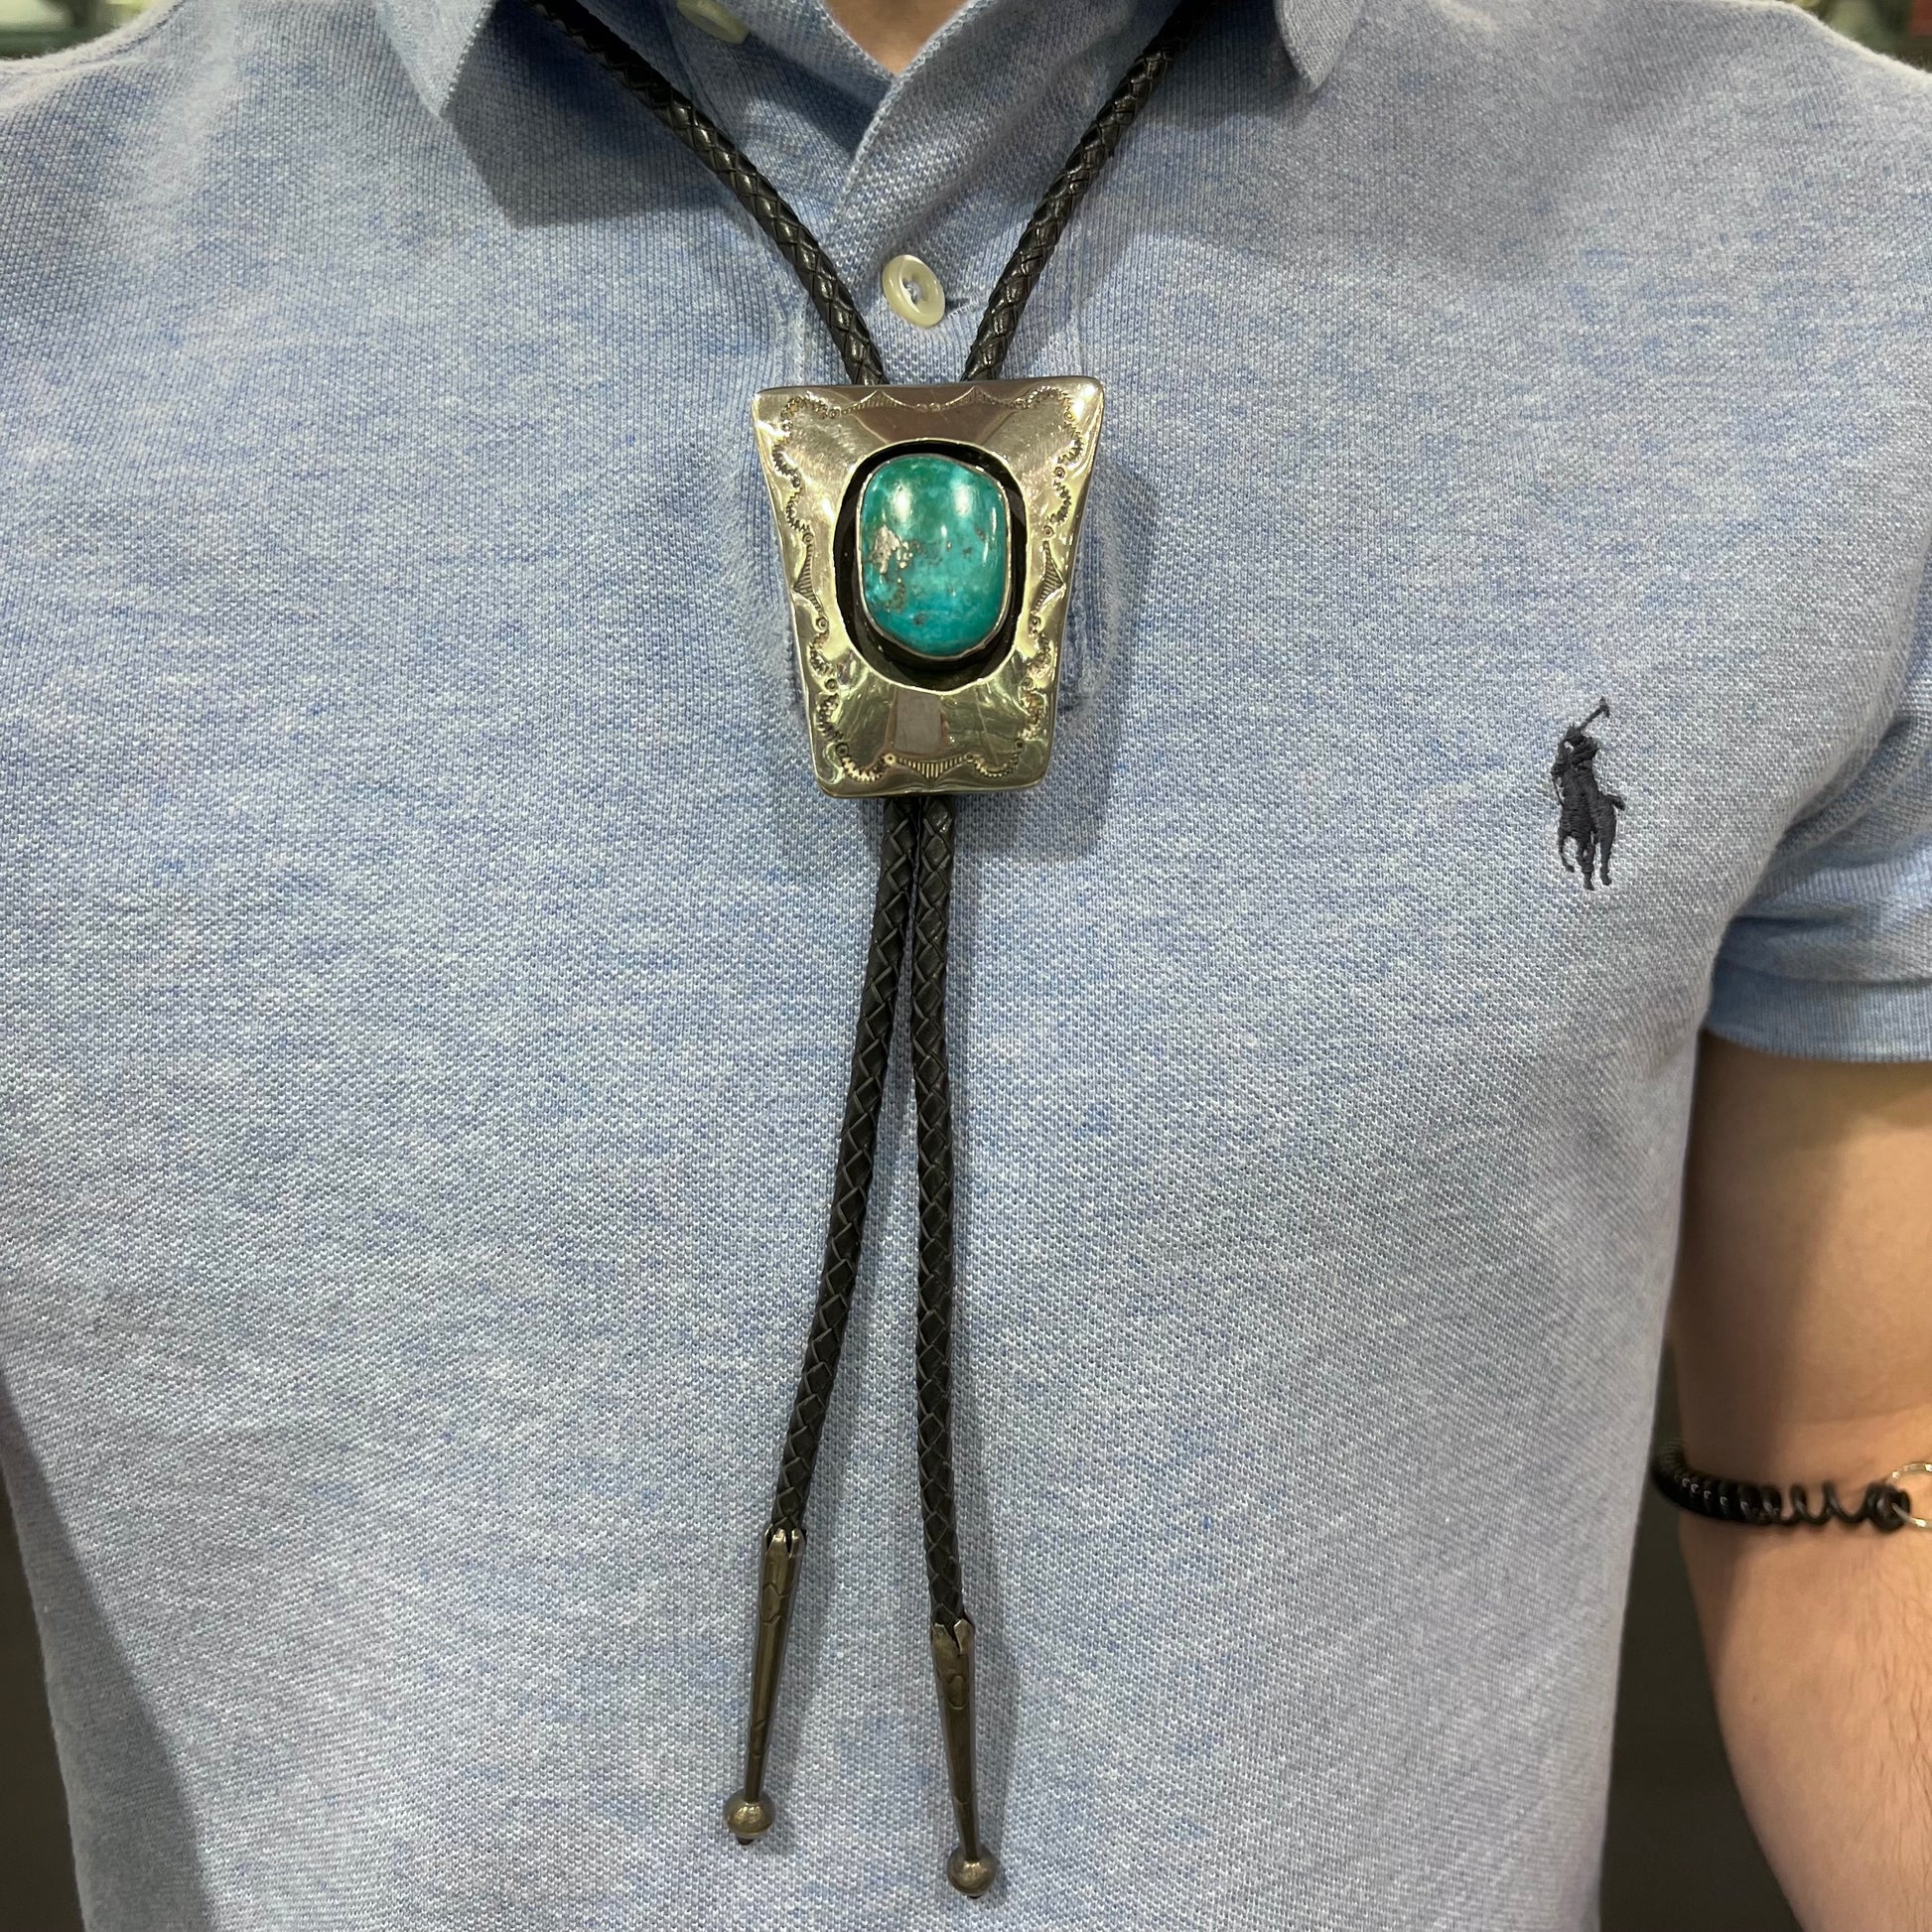 A vintage sterling silver Navajo bolo tie set with Morenci turquoise, handmade by artist Delvin Nelson.